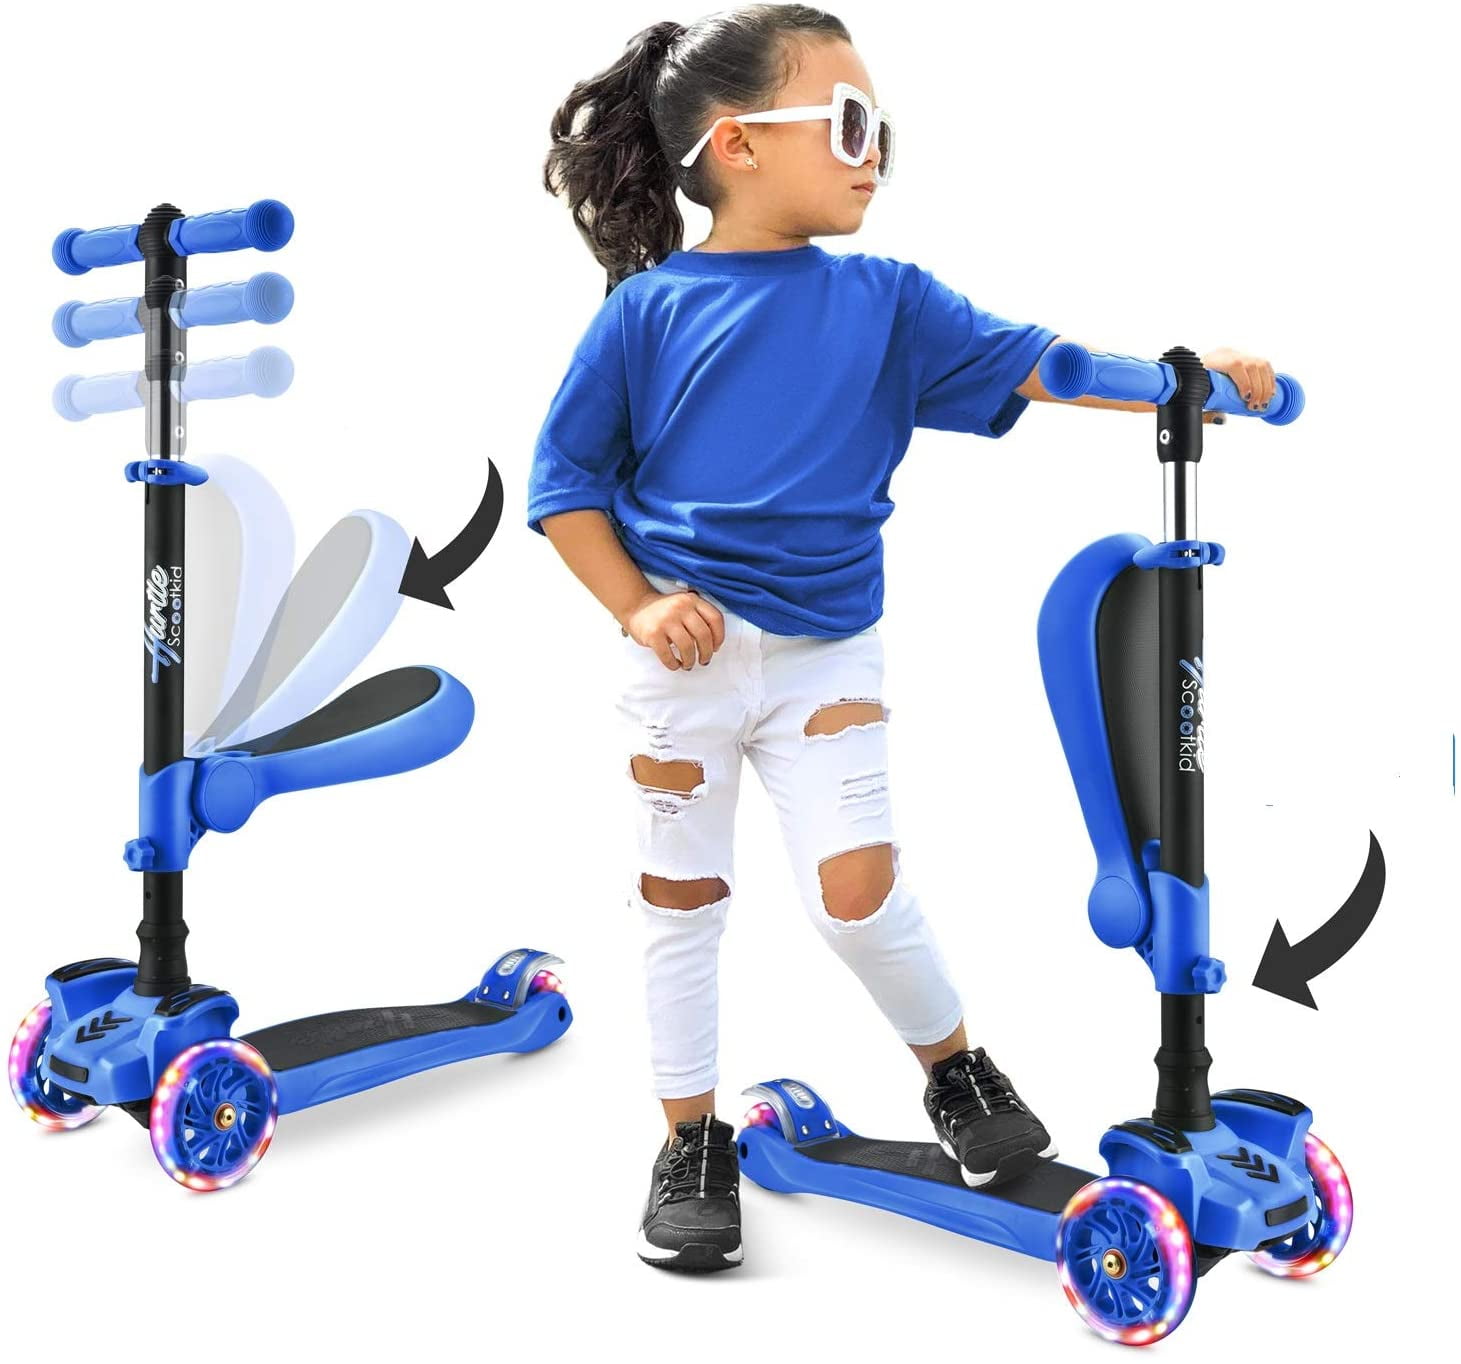 Flashing LED Lights Wheels Foldable & Height Adjustable Lean to Steer BOLDCUBE Kids Scooter 3 Wheel